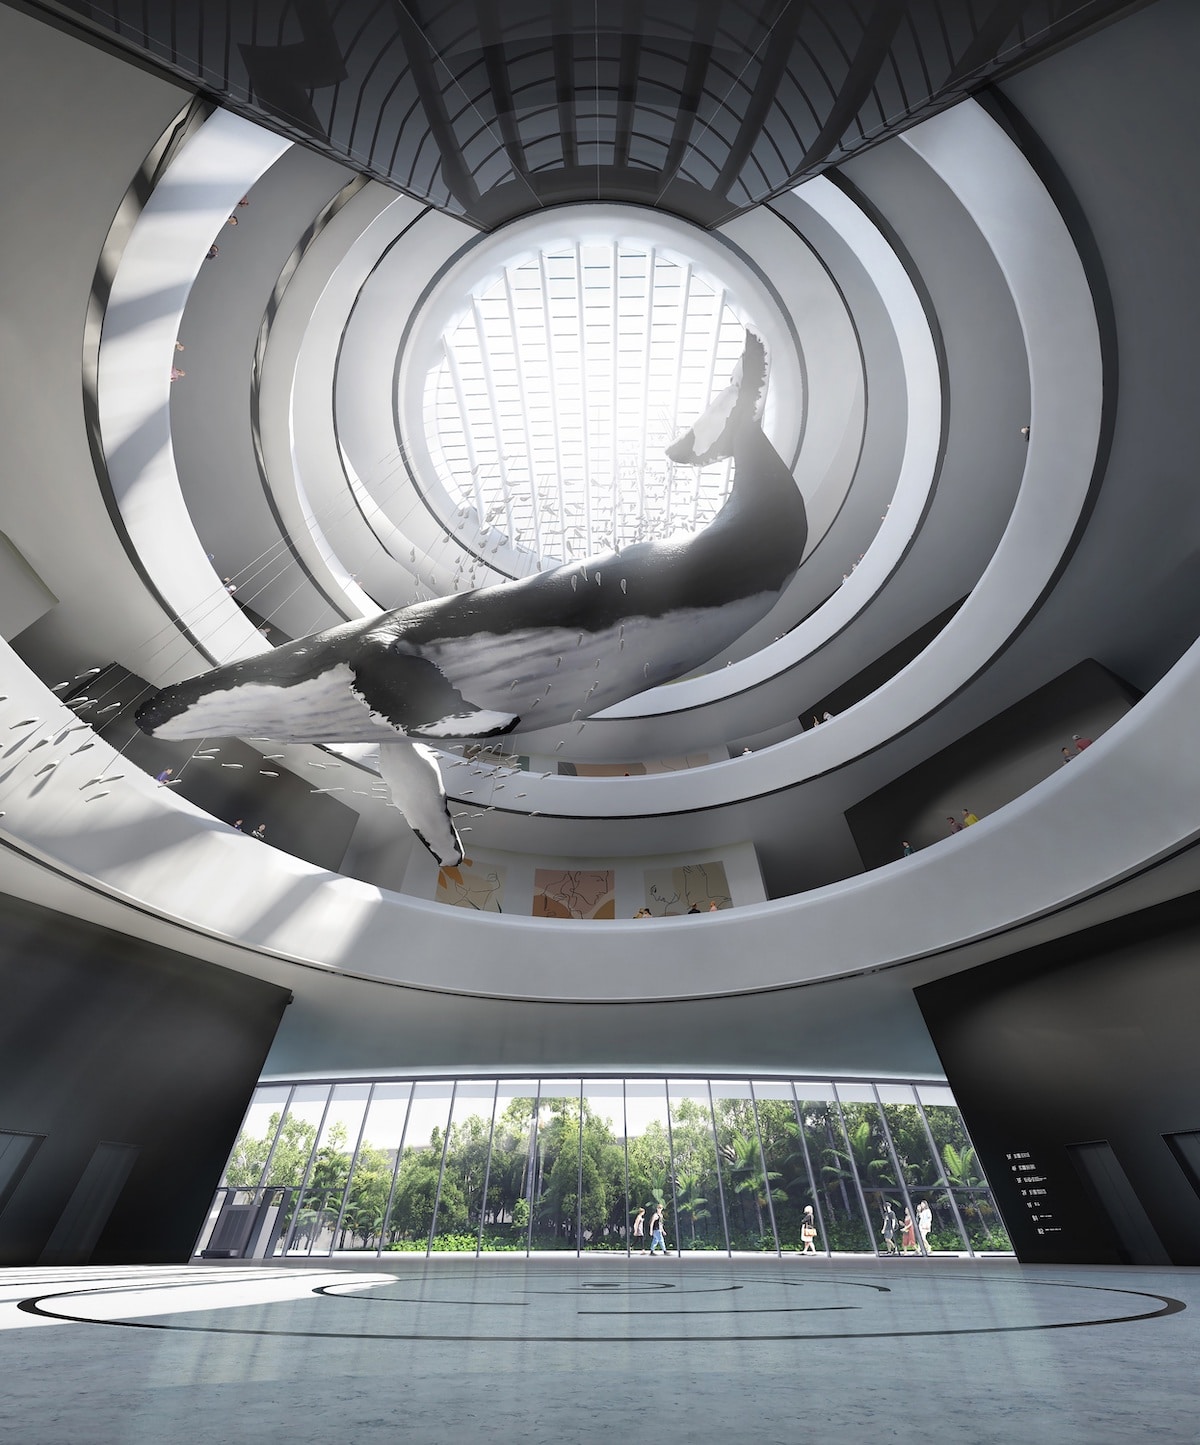 Interior Atrium View of Hainan Science and Technology Museum by MAD Architects